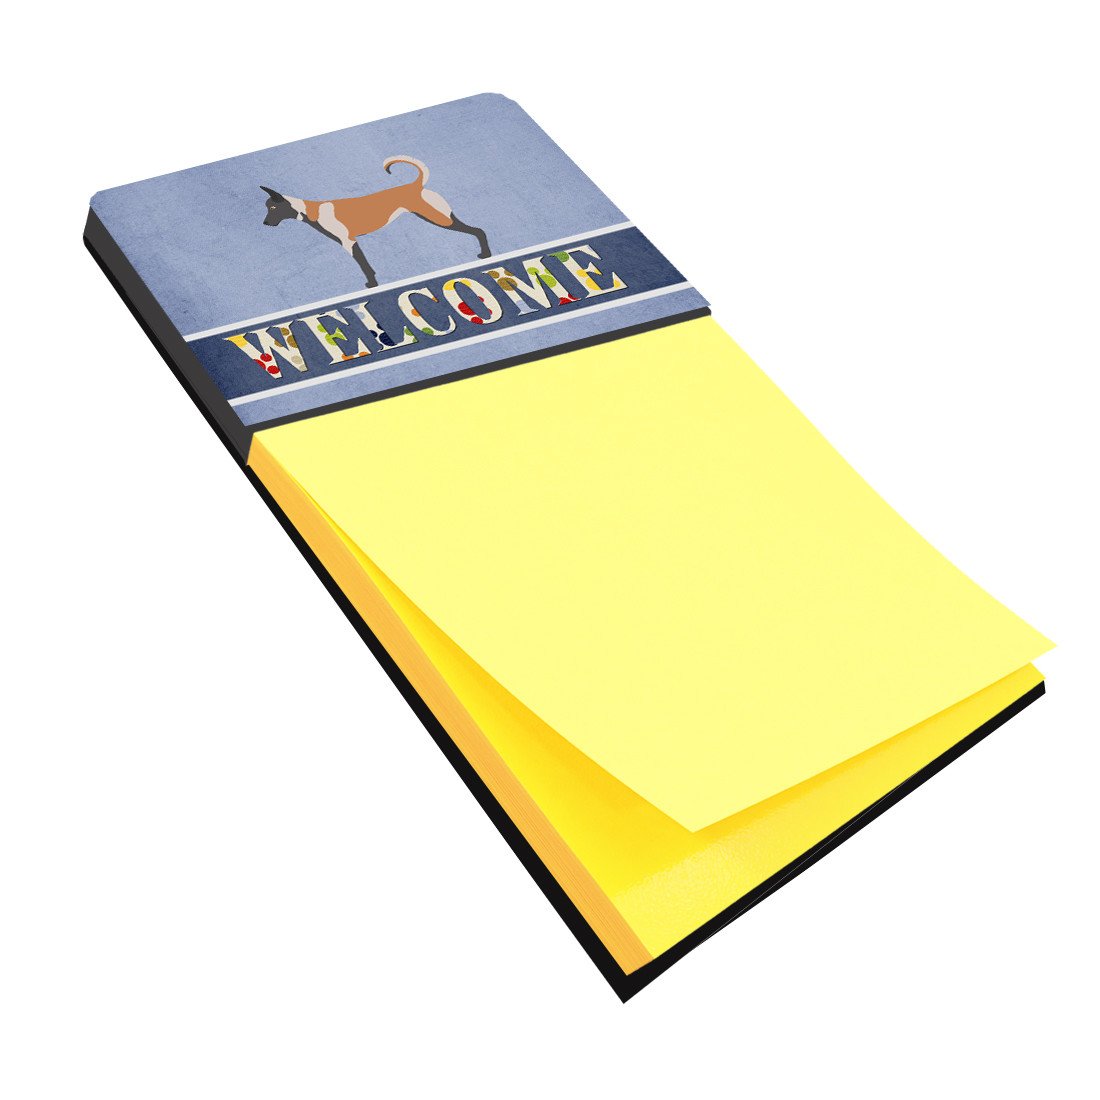 Malinois Welcome Sticky Note Holder BB8299SN by Caroline's Treasures